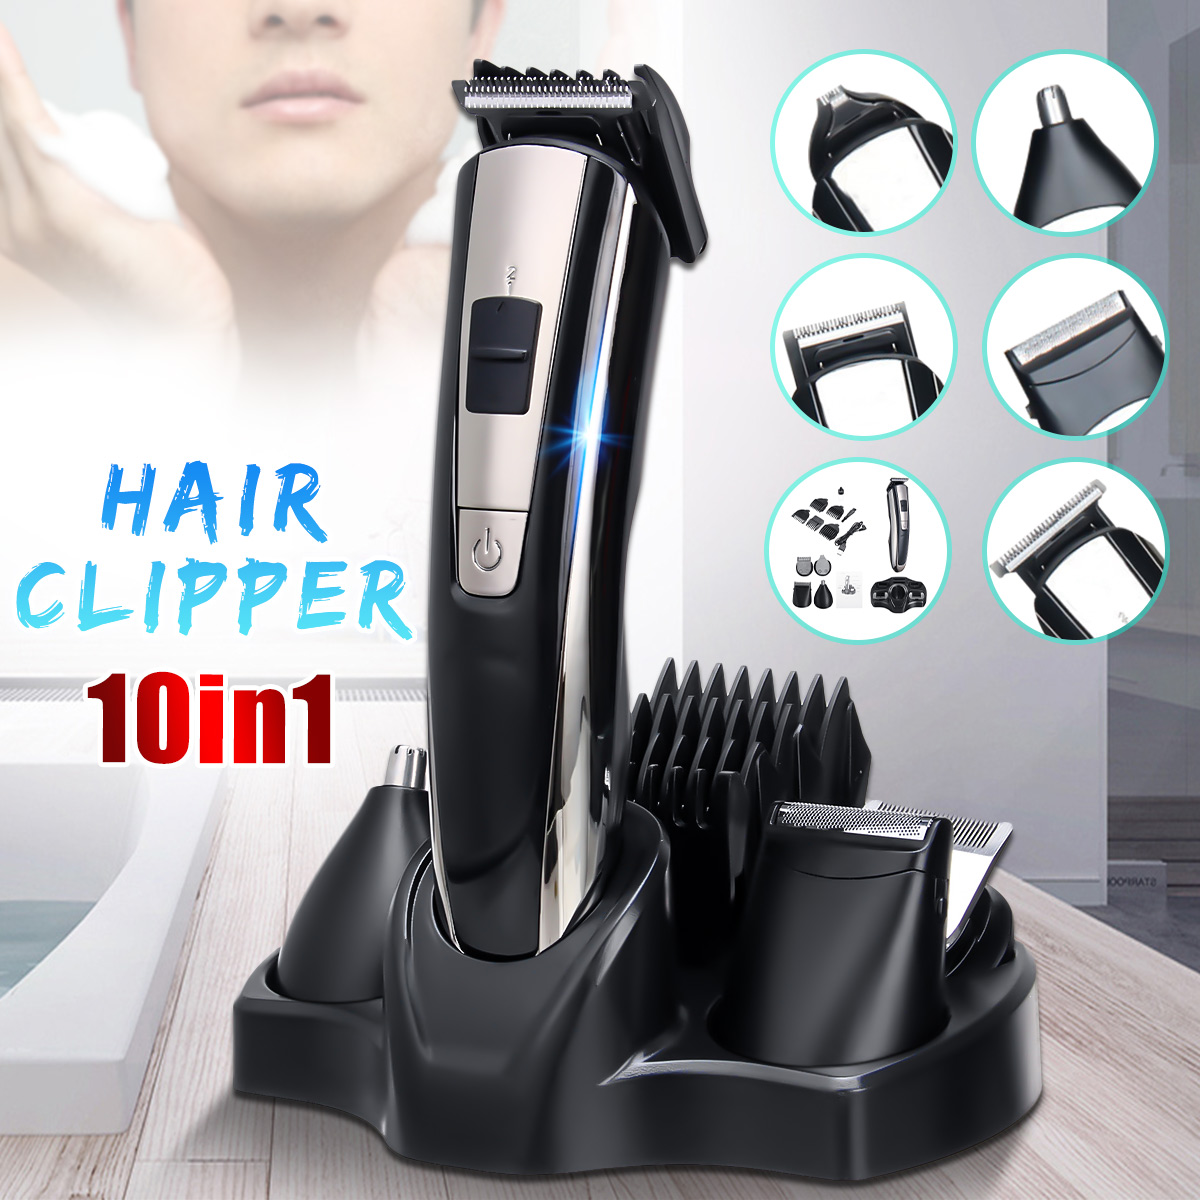 10 in 1 Multi-function Hiar Clipper Nose Hair Trimmer Shaver Angle Cutter